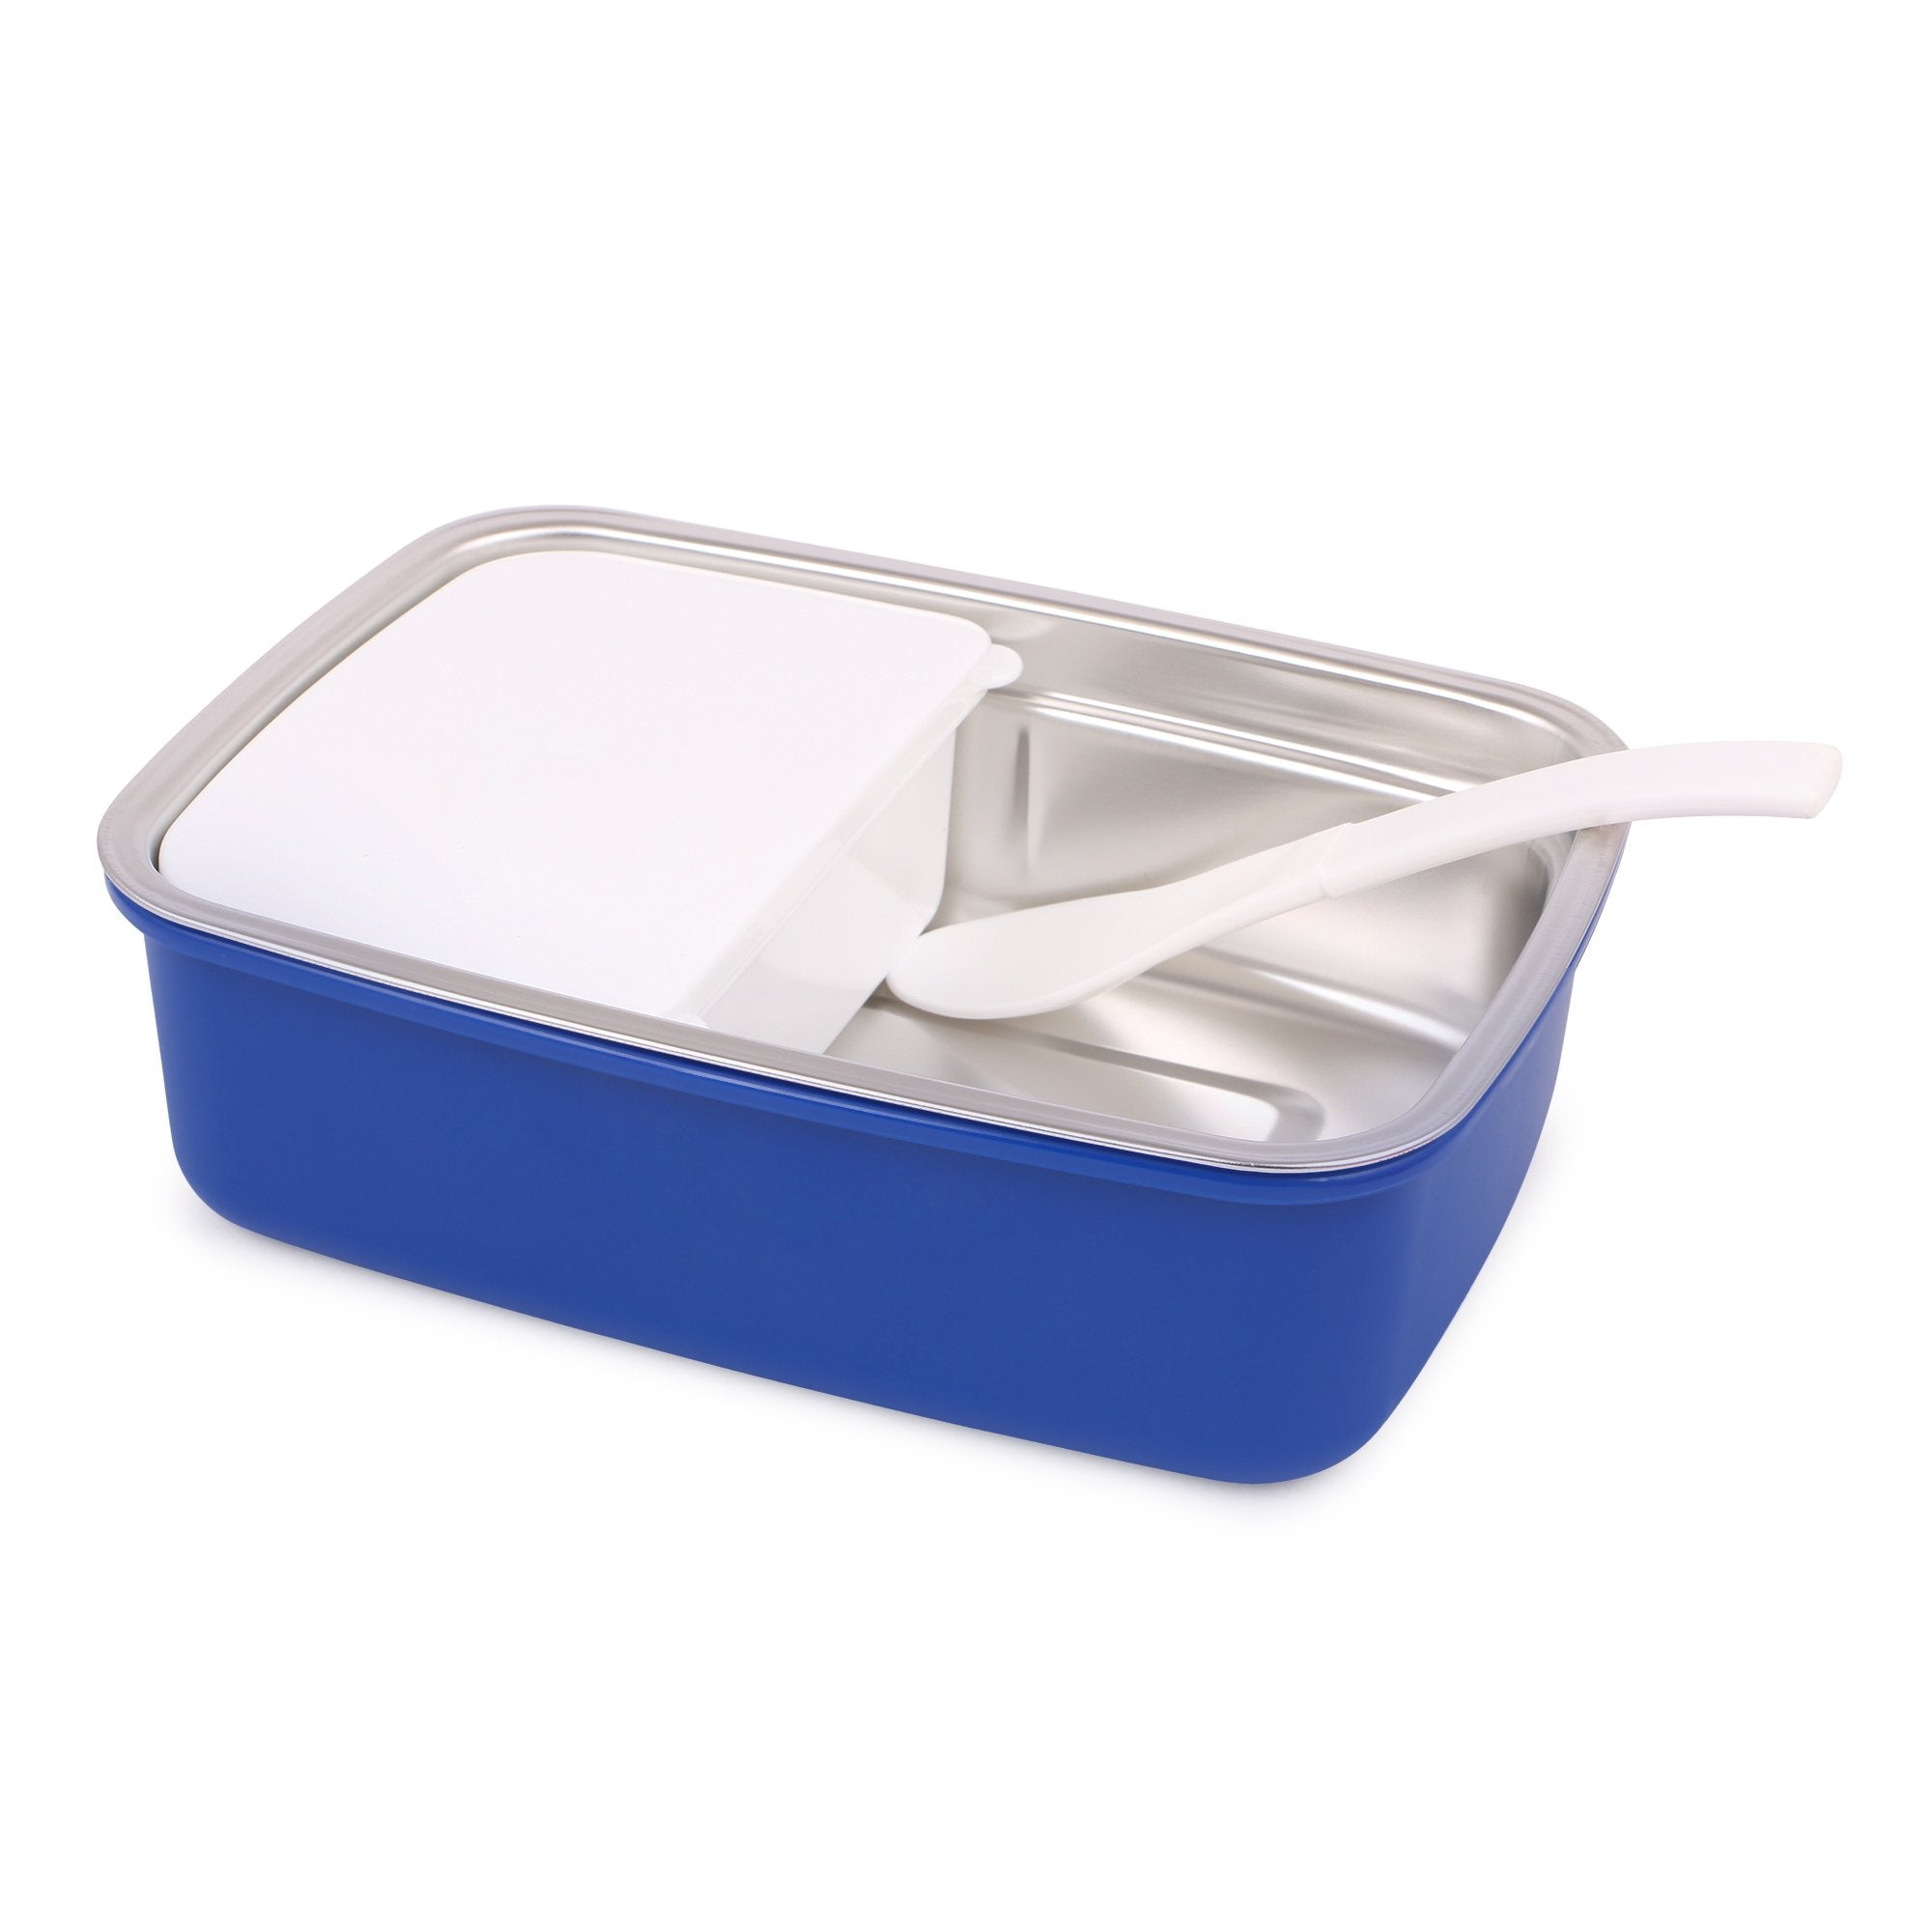 Stainless Steel insulated dual Color Kids Lunch Box 8001-800 ml